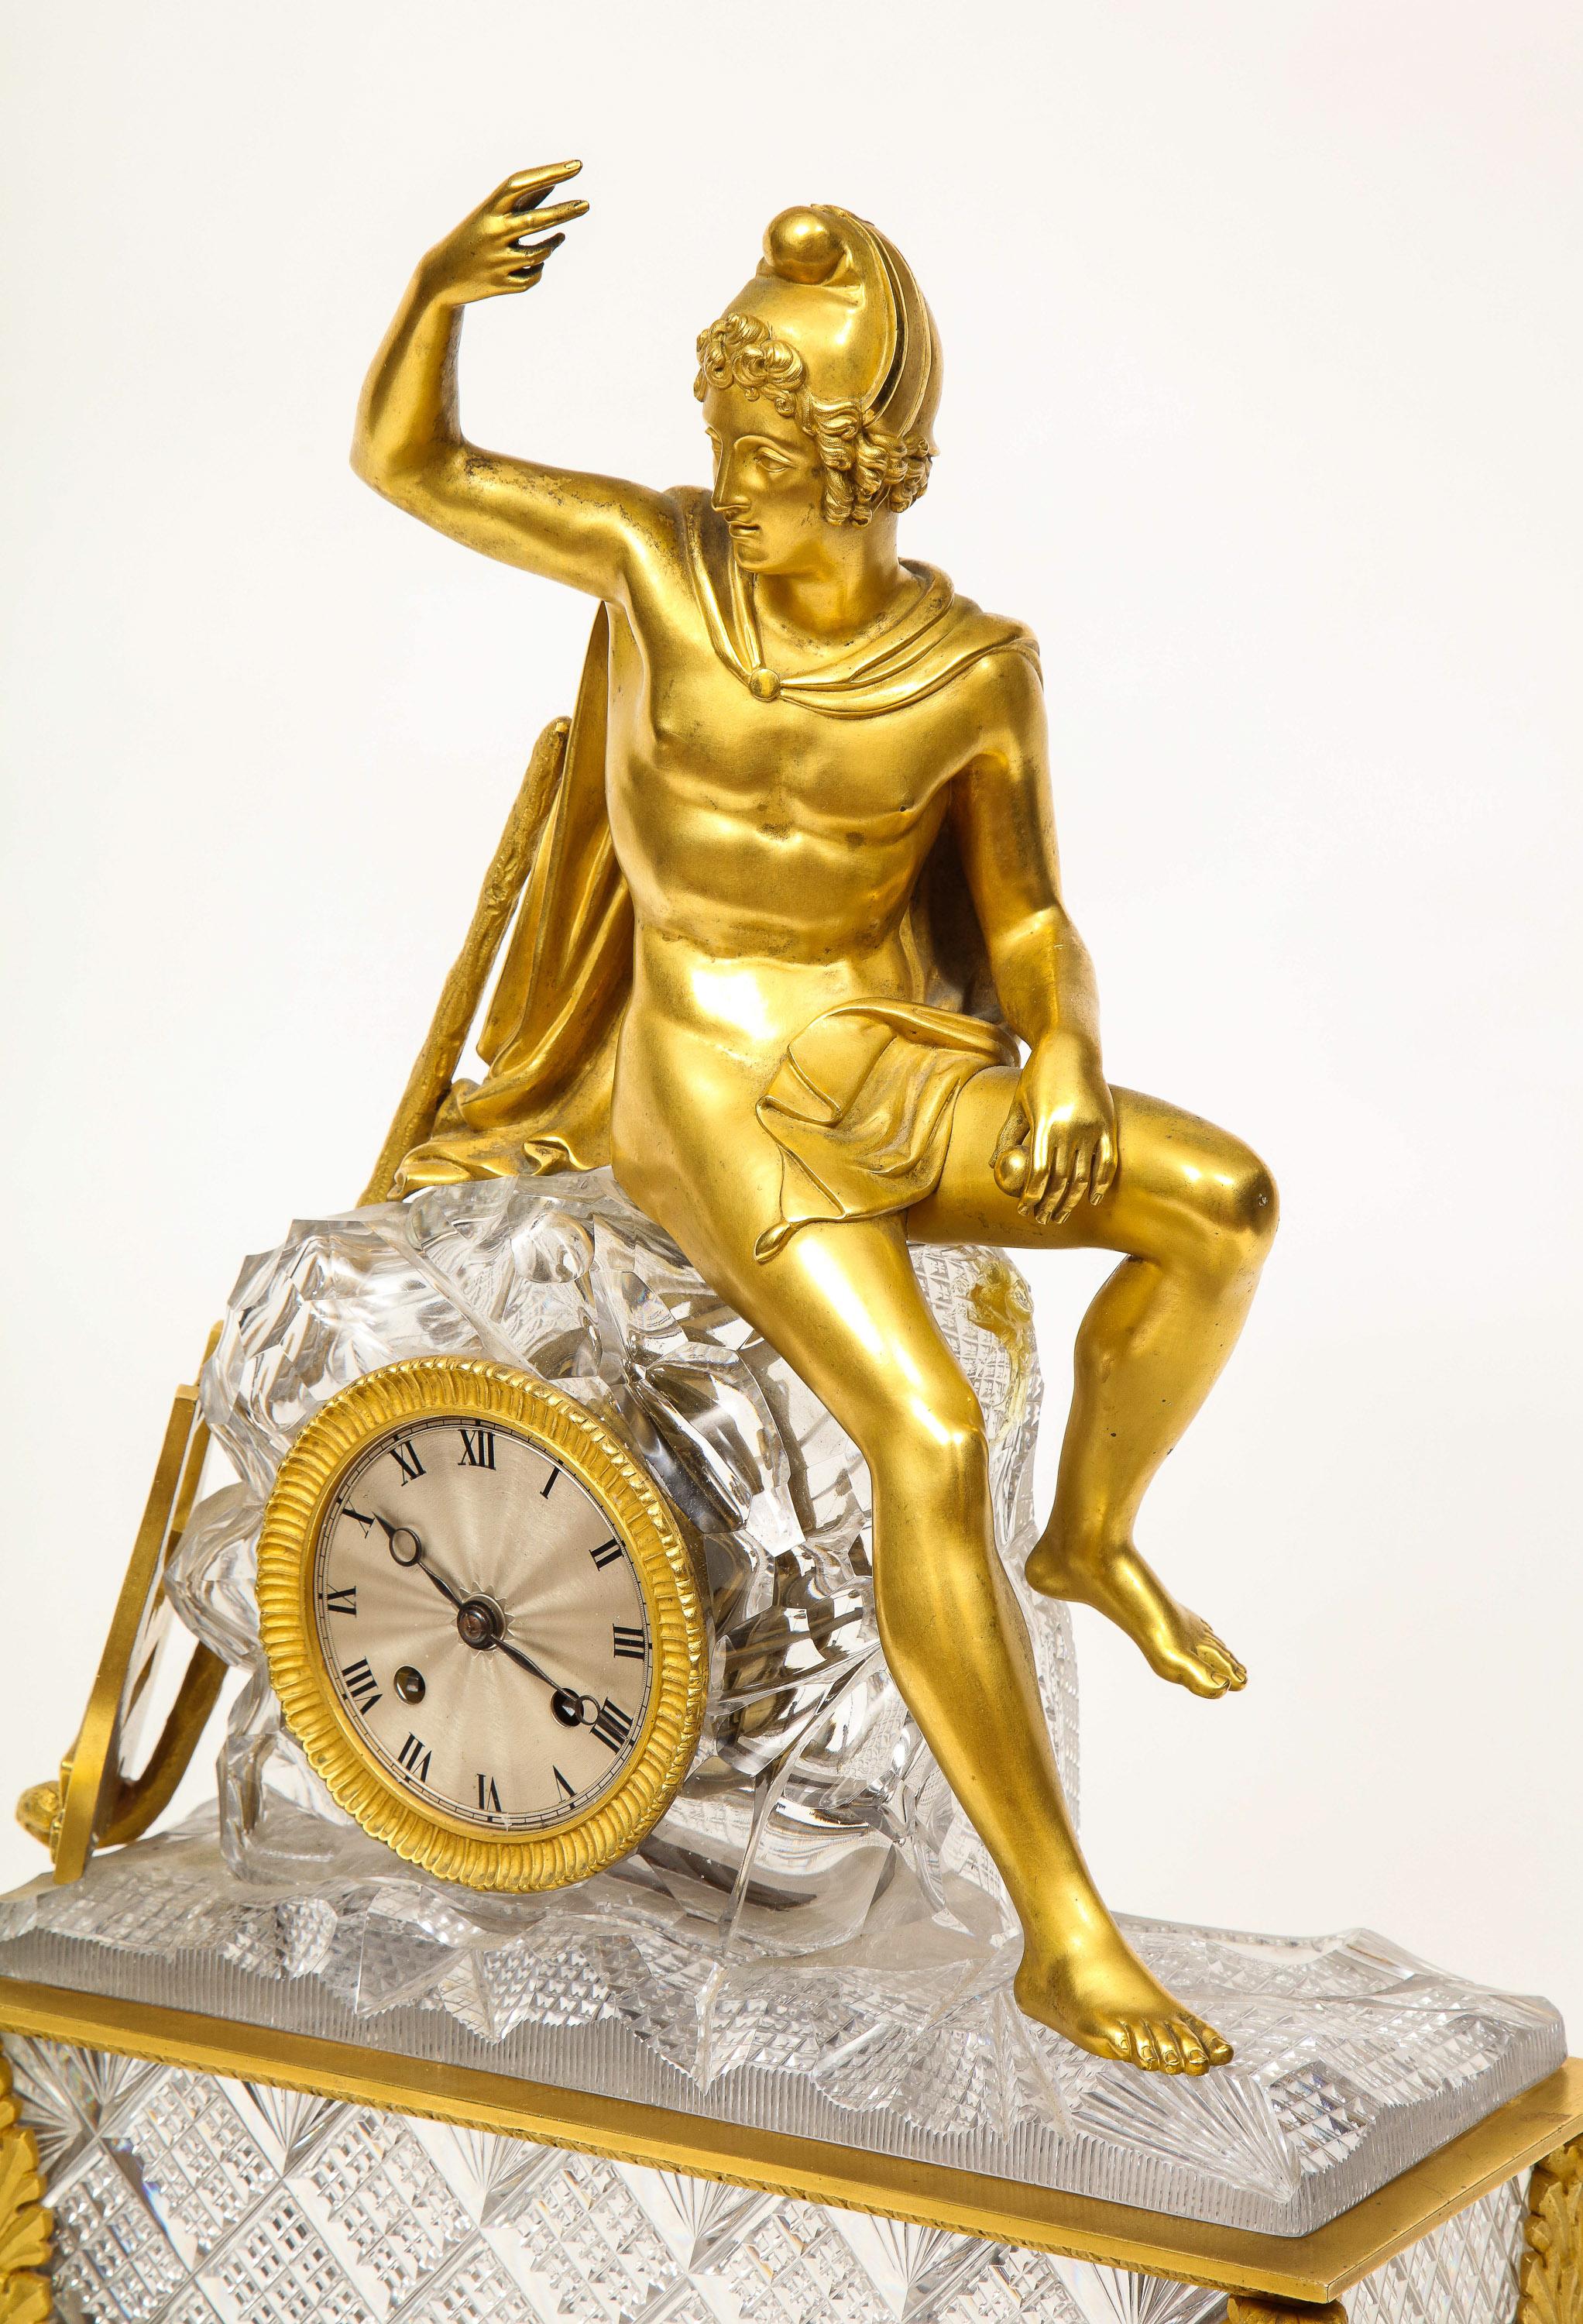 Exquisite French Empire Ormolu and Cut-Crystal Clock, c. 1815 For Sale 12